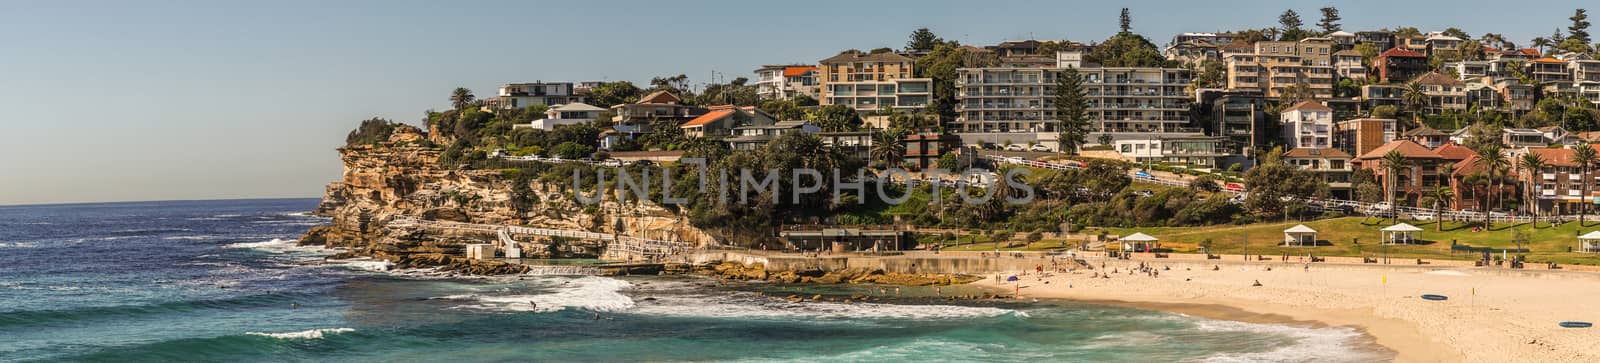 Sydney, Australia - February 11, 2019: Panorama shot of Bronte Beach, sea water, yellow sand, green park under blue sky, seen from North cliff. Band with housing on horizon. Brown rocks in foreground. People active.